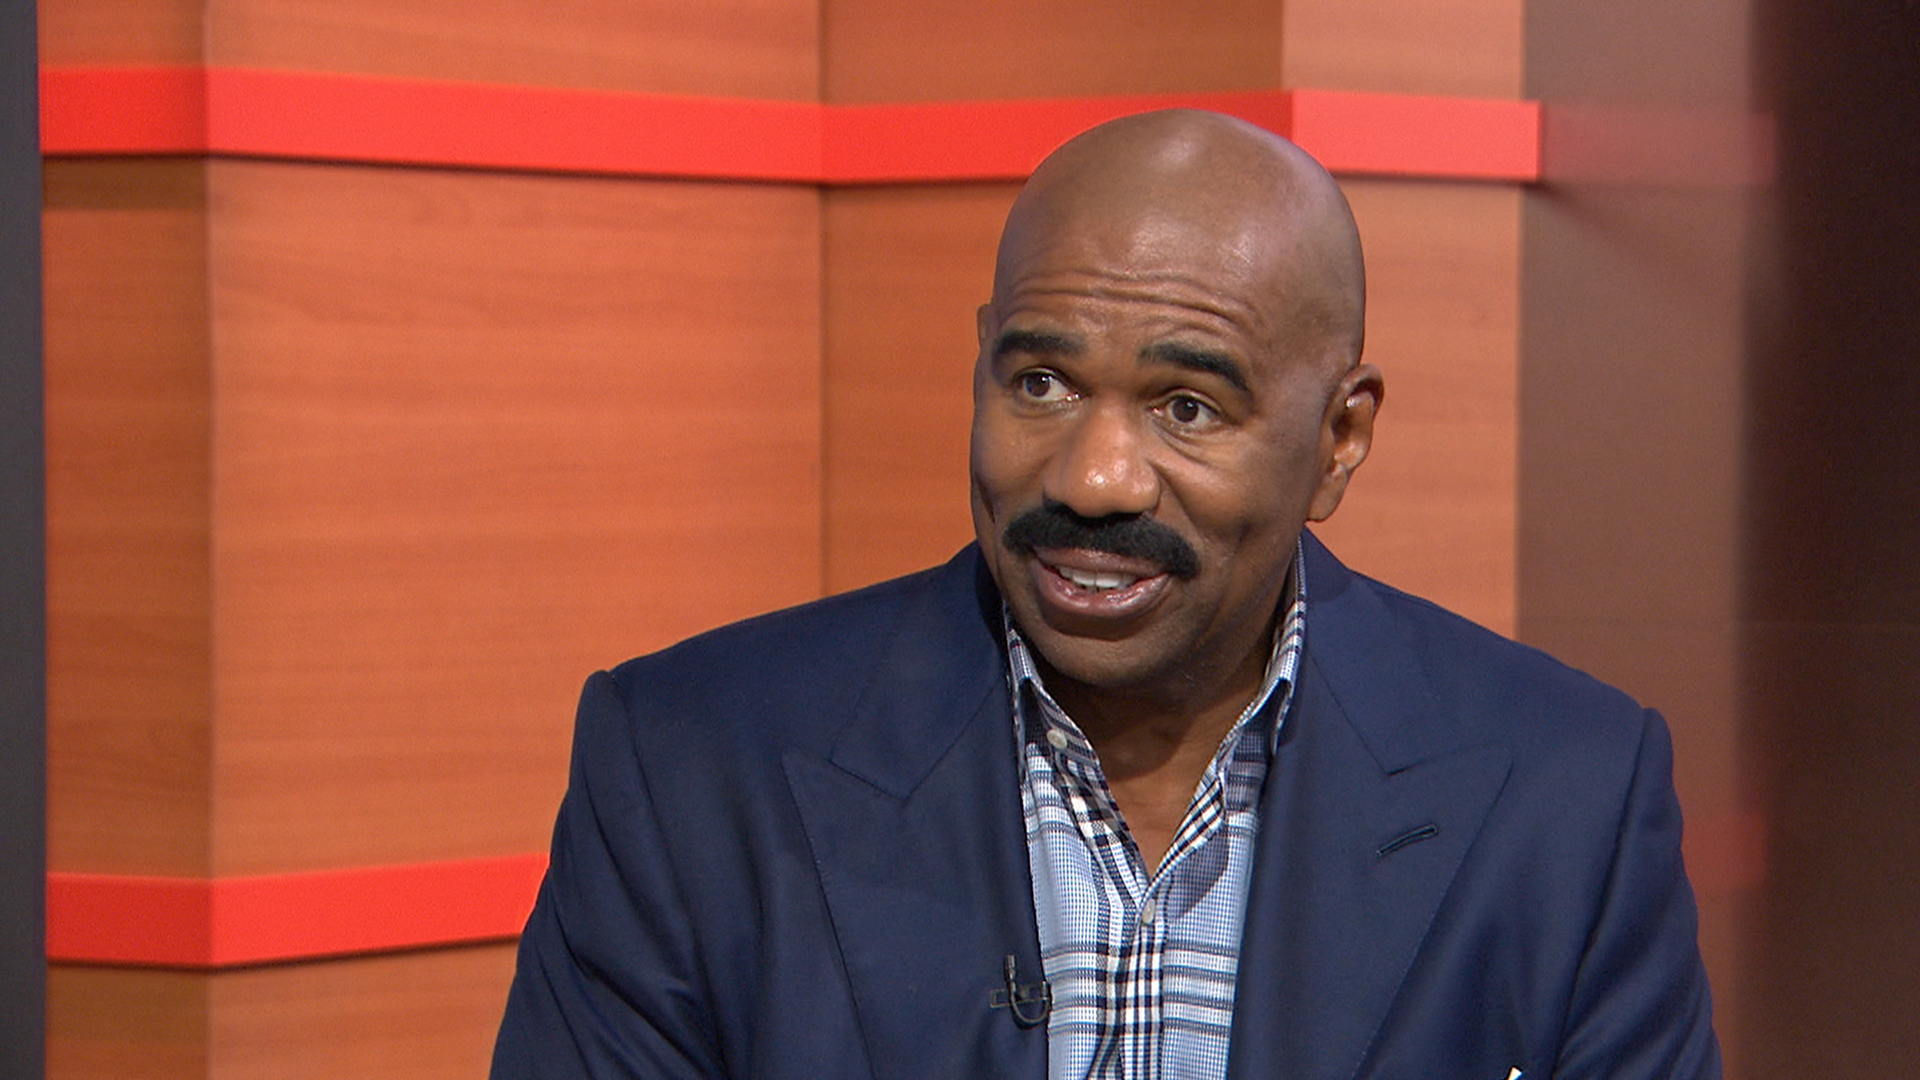 Steve Harvey on new season of show and 'What Men Really Think' .